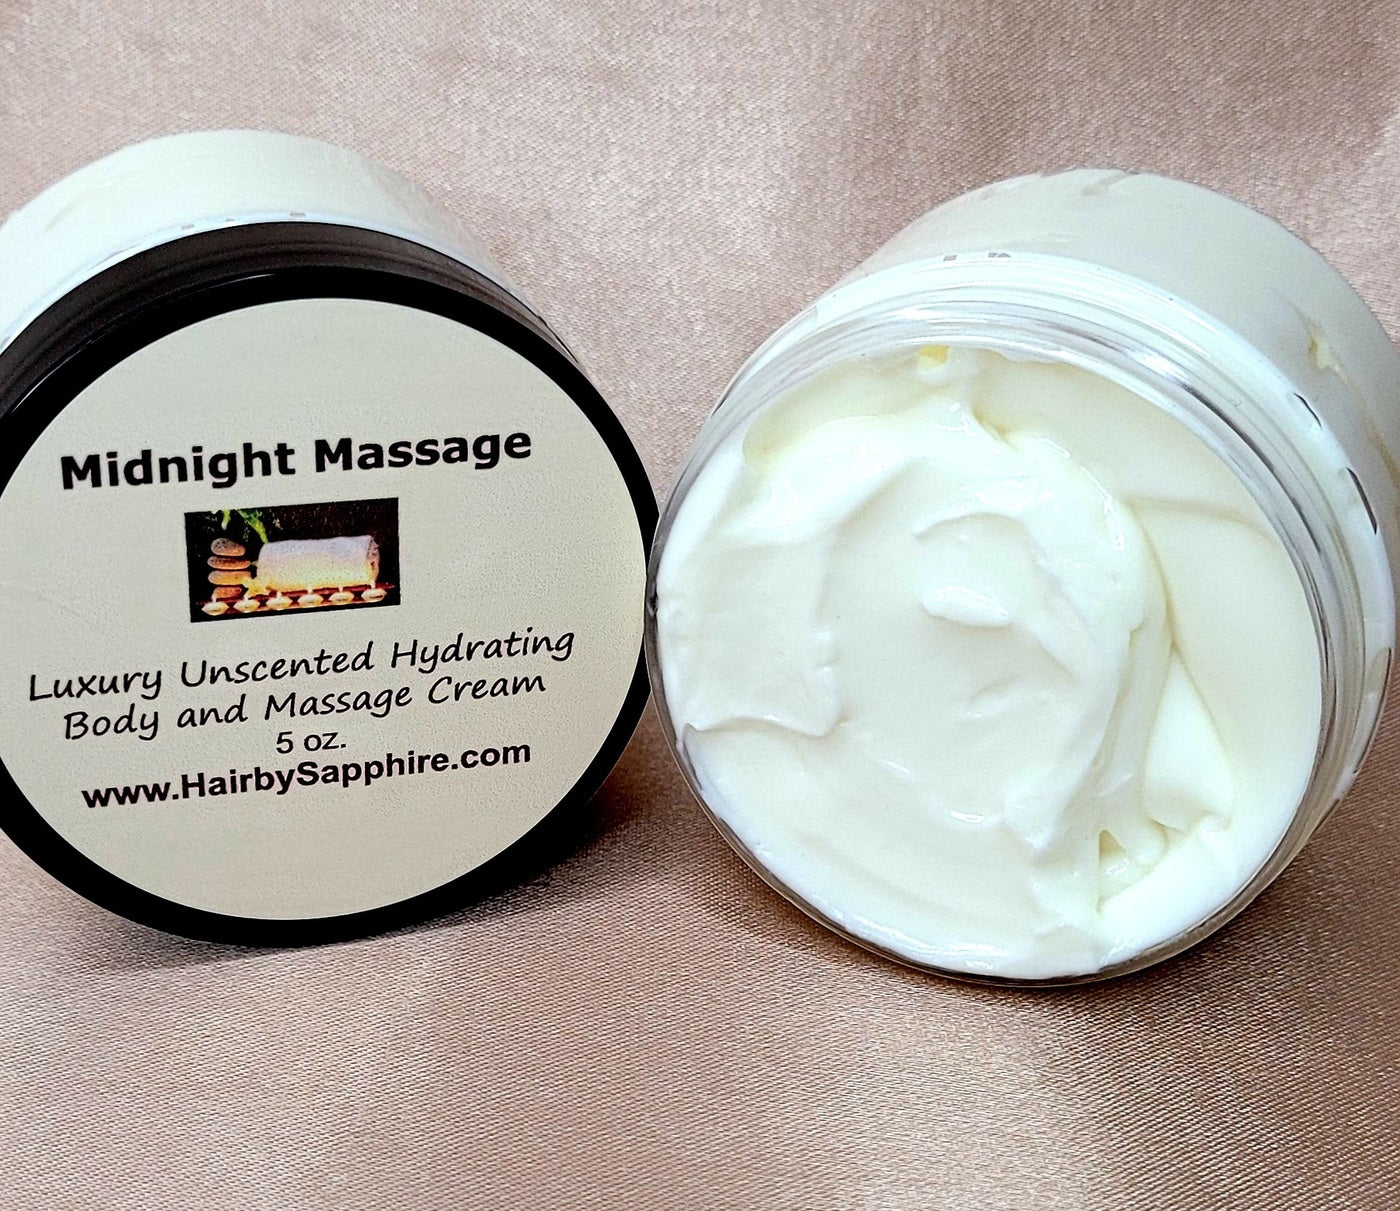 Midnight Massage luxury unscented hydrating body and massage cream. after shower body moisturizer. moisturizing body cream. hypoallergenic body hand and face cream